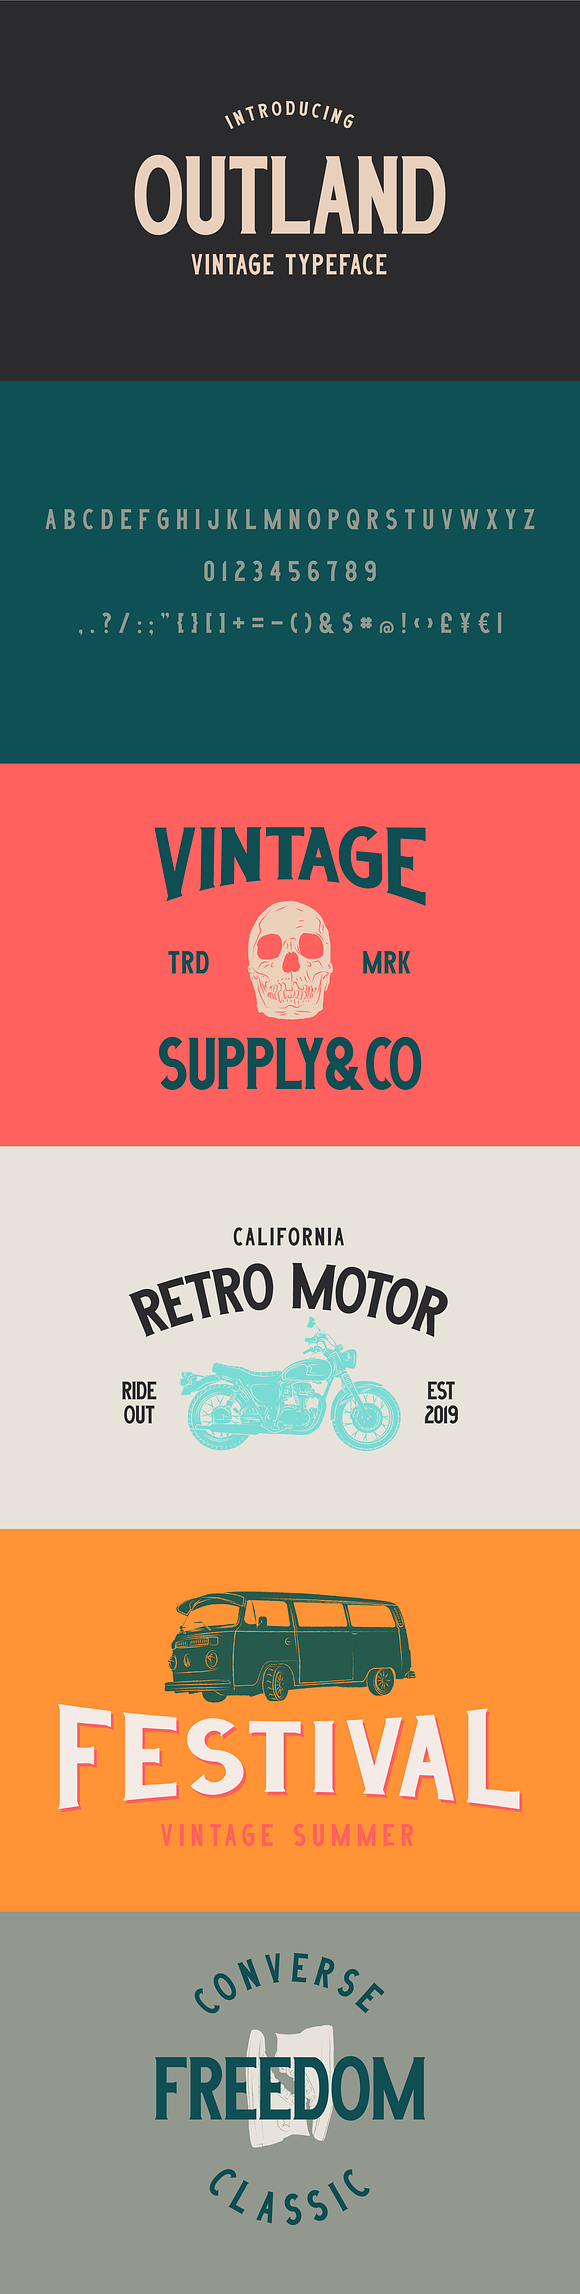 Outland - Vintage Typeface in Display Fonts - product preview 5